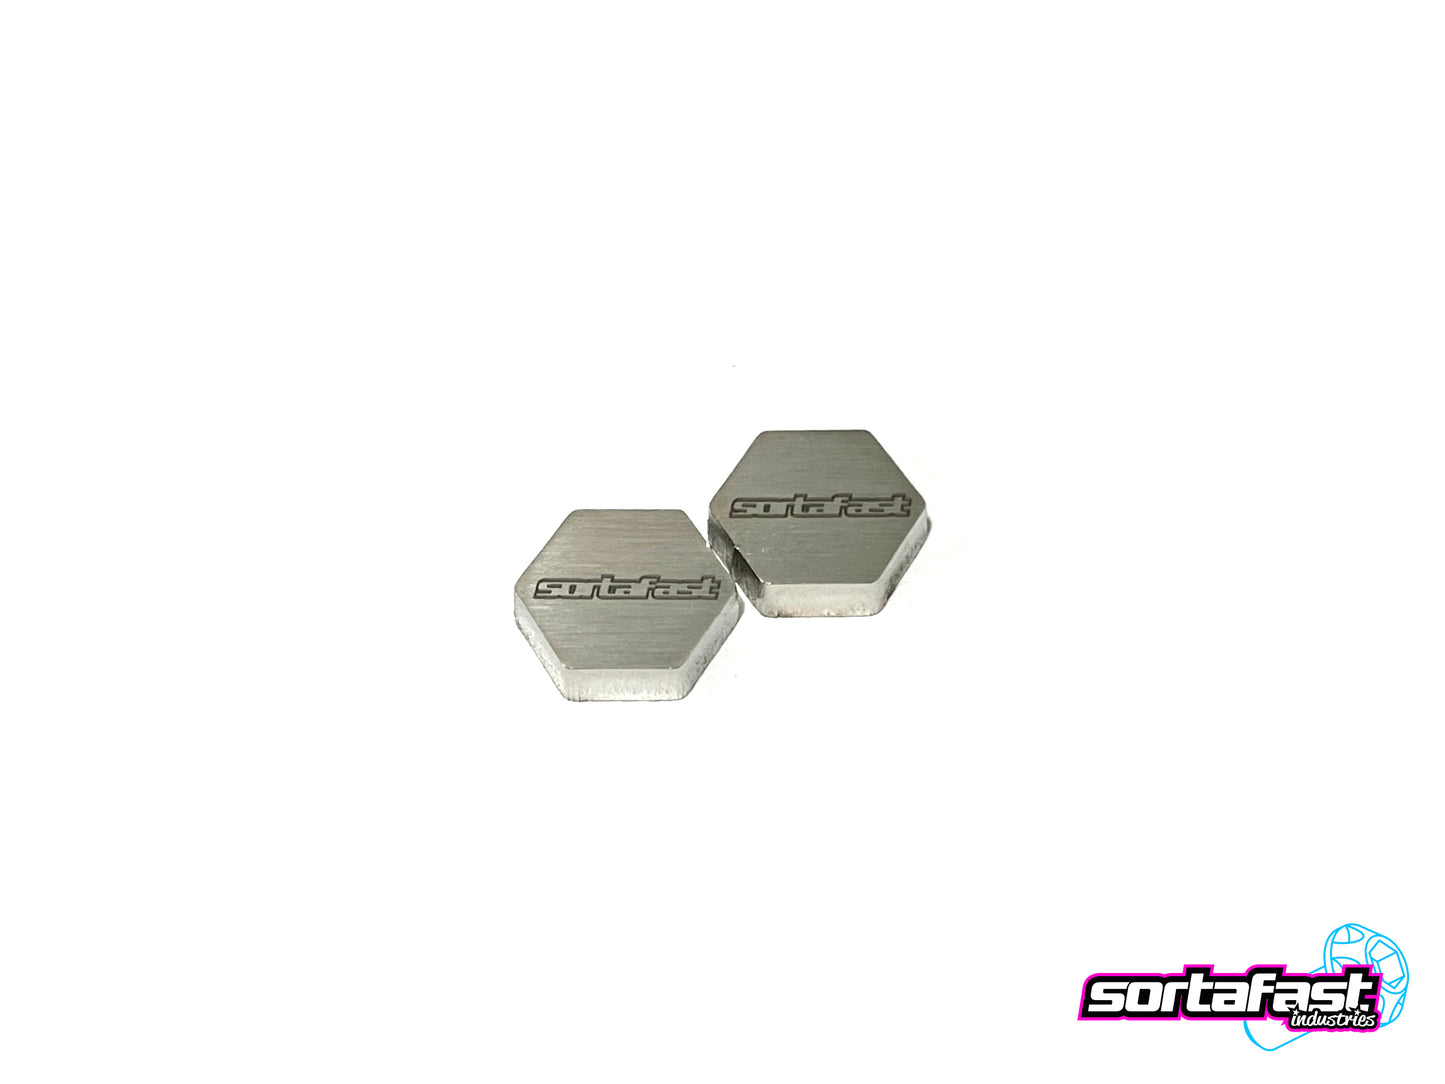 Sortafast Stainless Steel Chassis Weights - 2.5g (2pc)